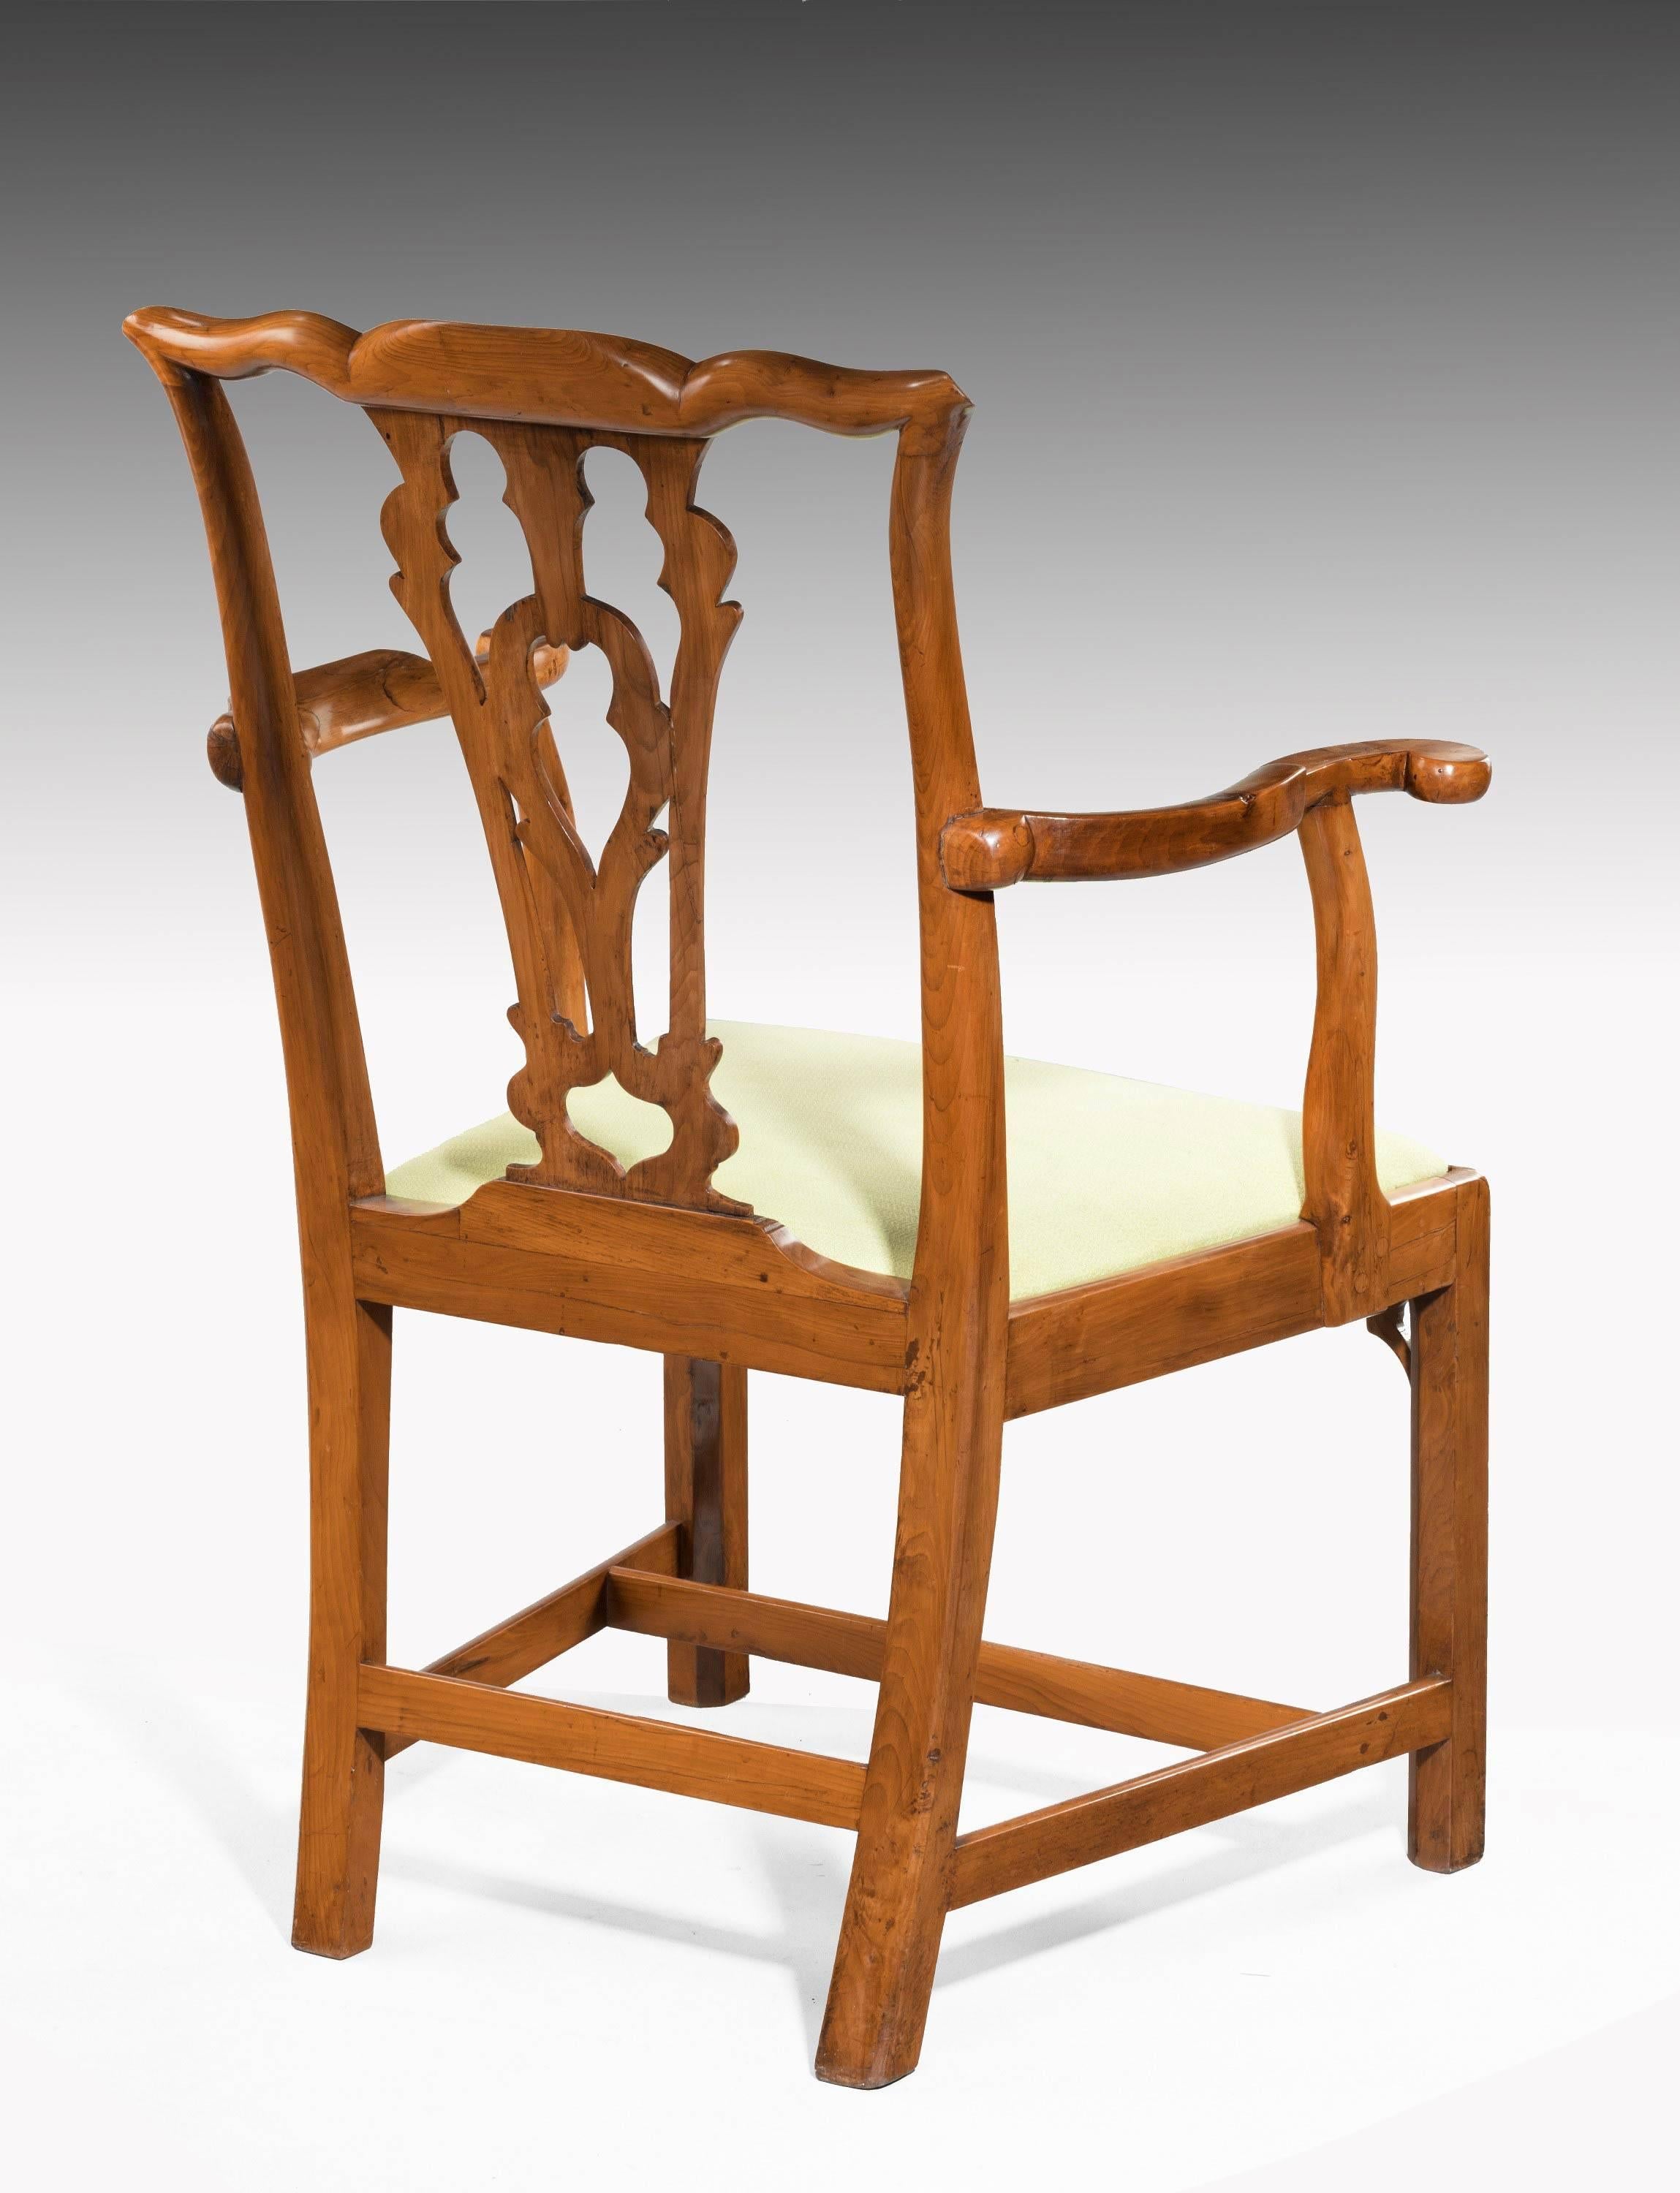 English Chippendale Period Yew Tree Elbow Chair with a Gothic Pierced Splat